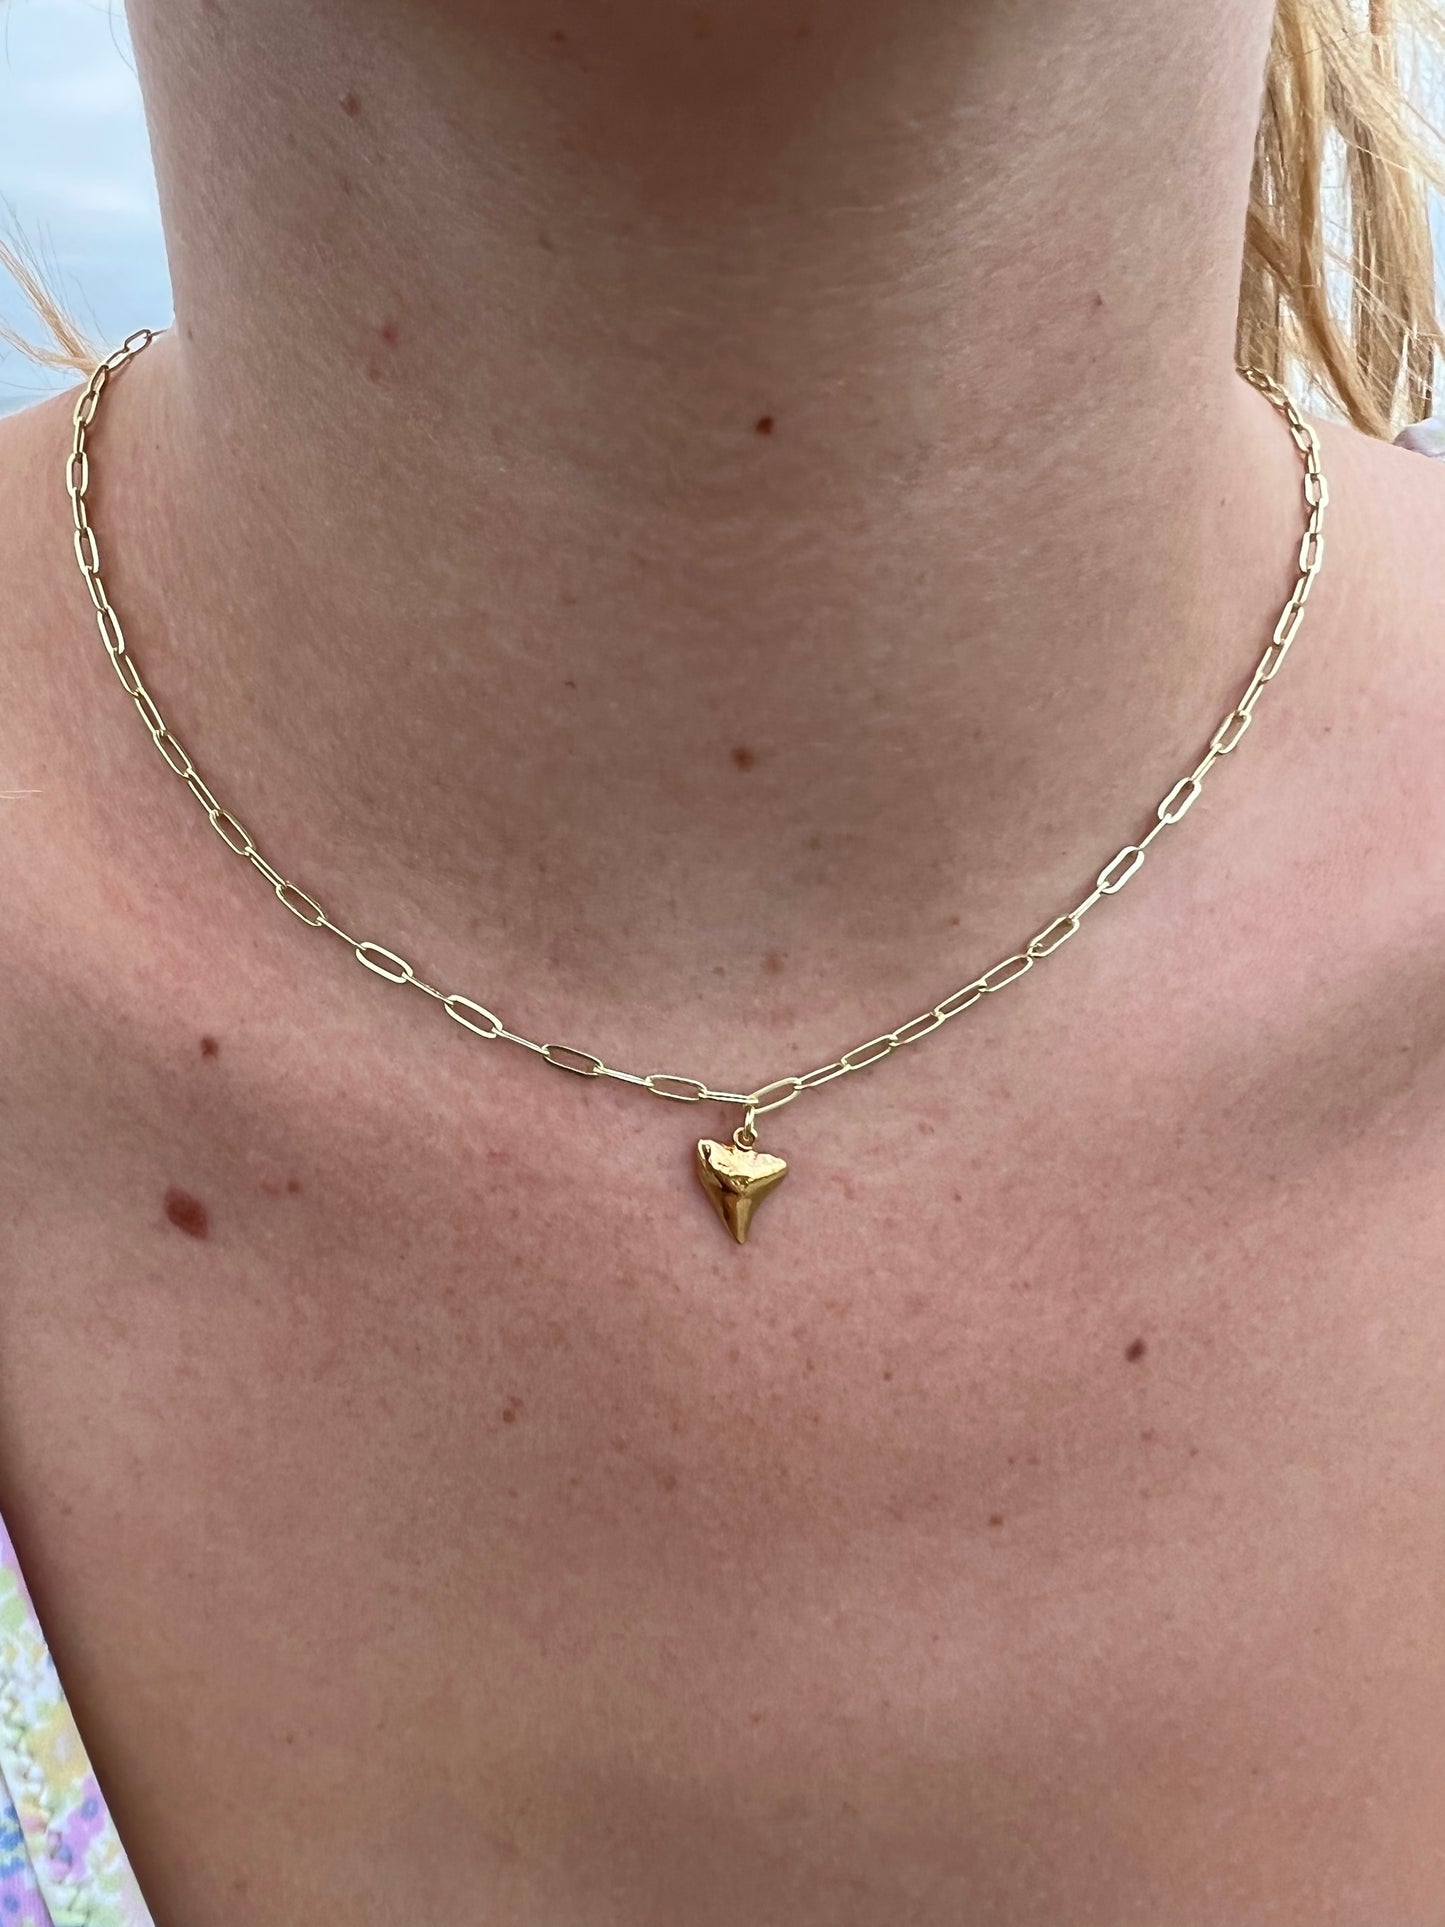 The Tiger Shark Tooth 18k Gold Plated Chain